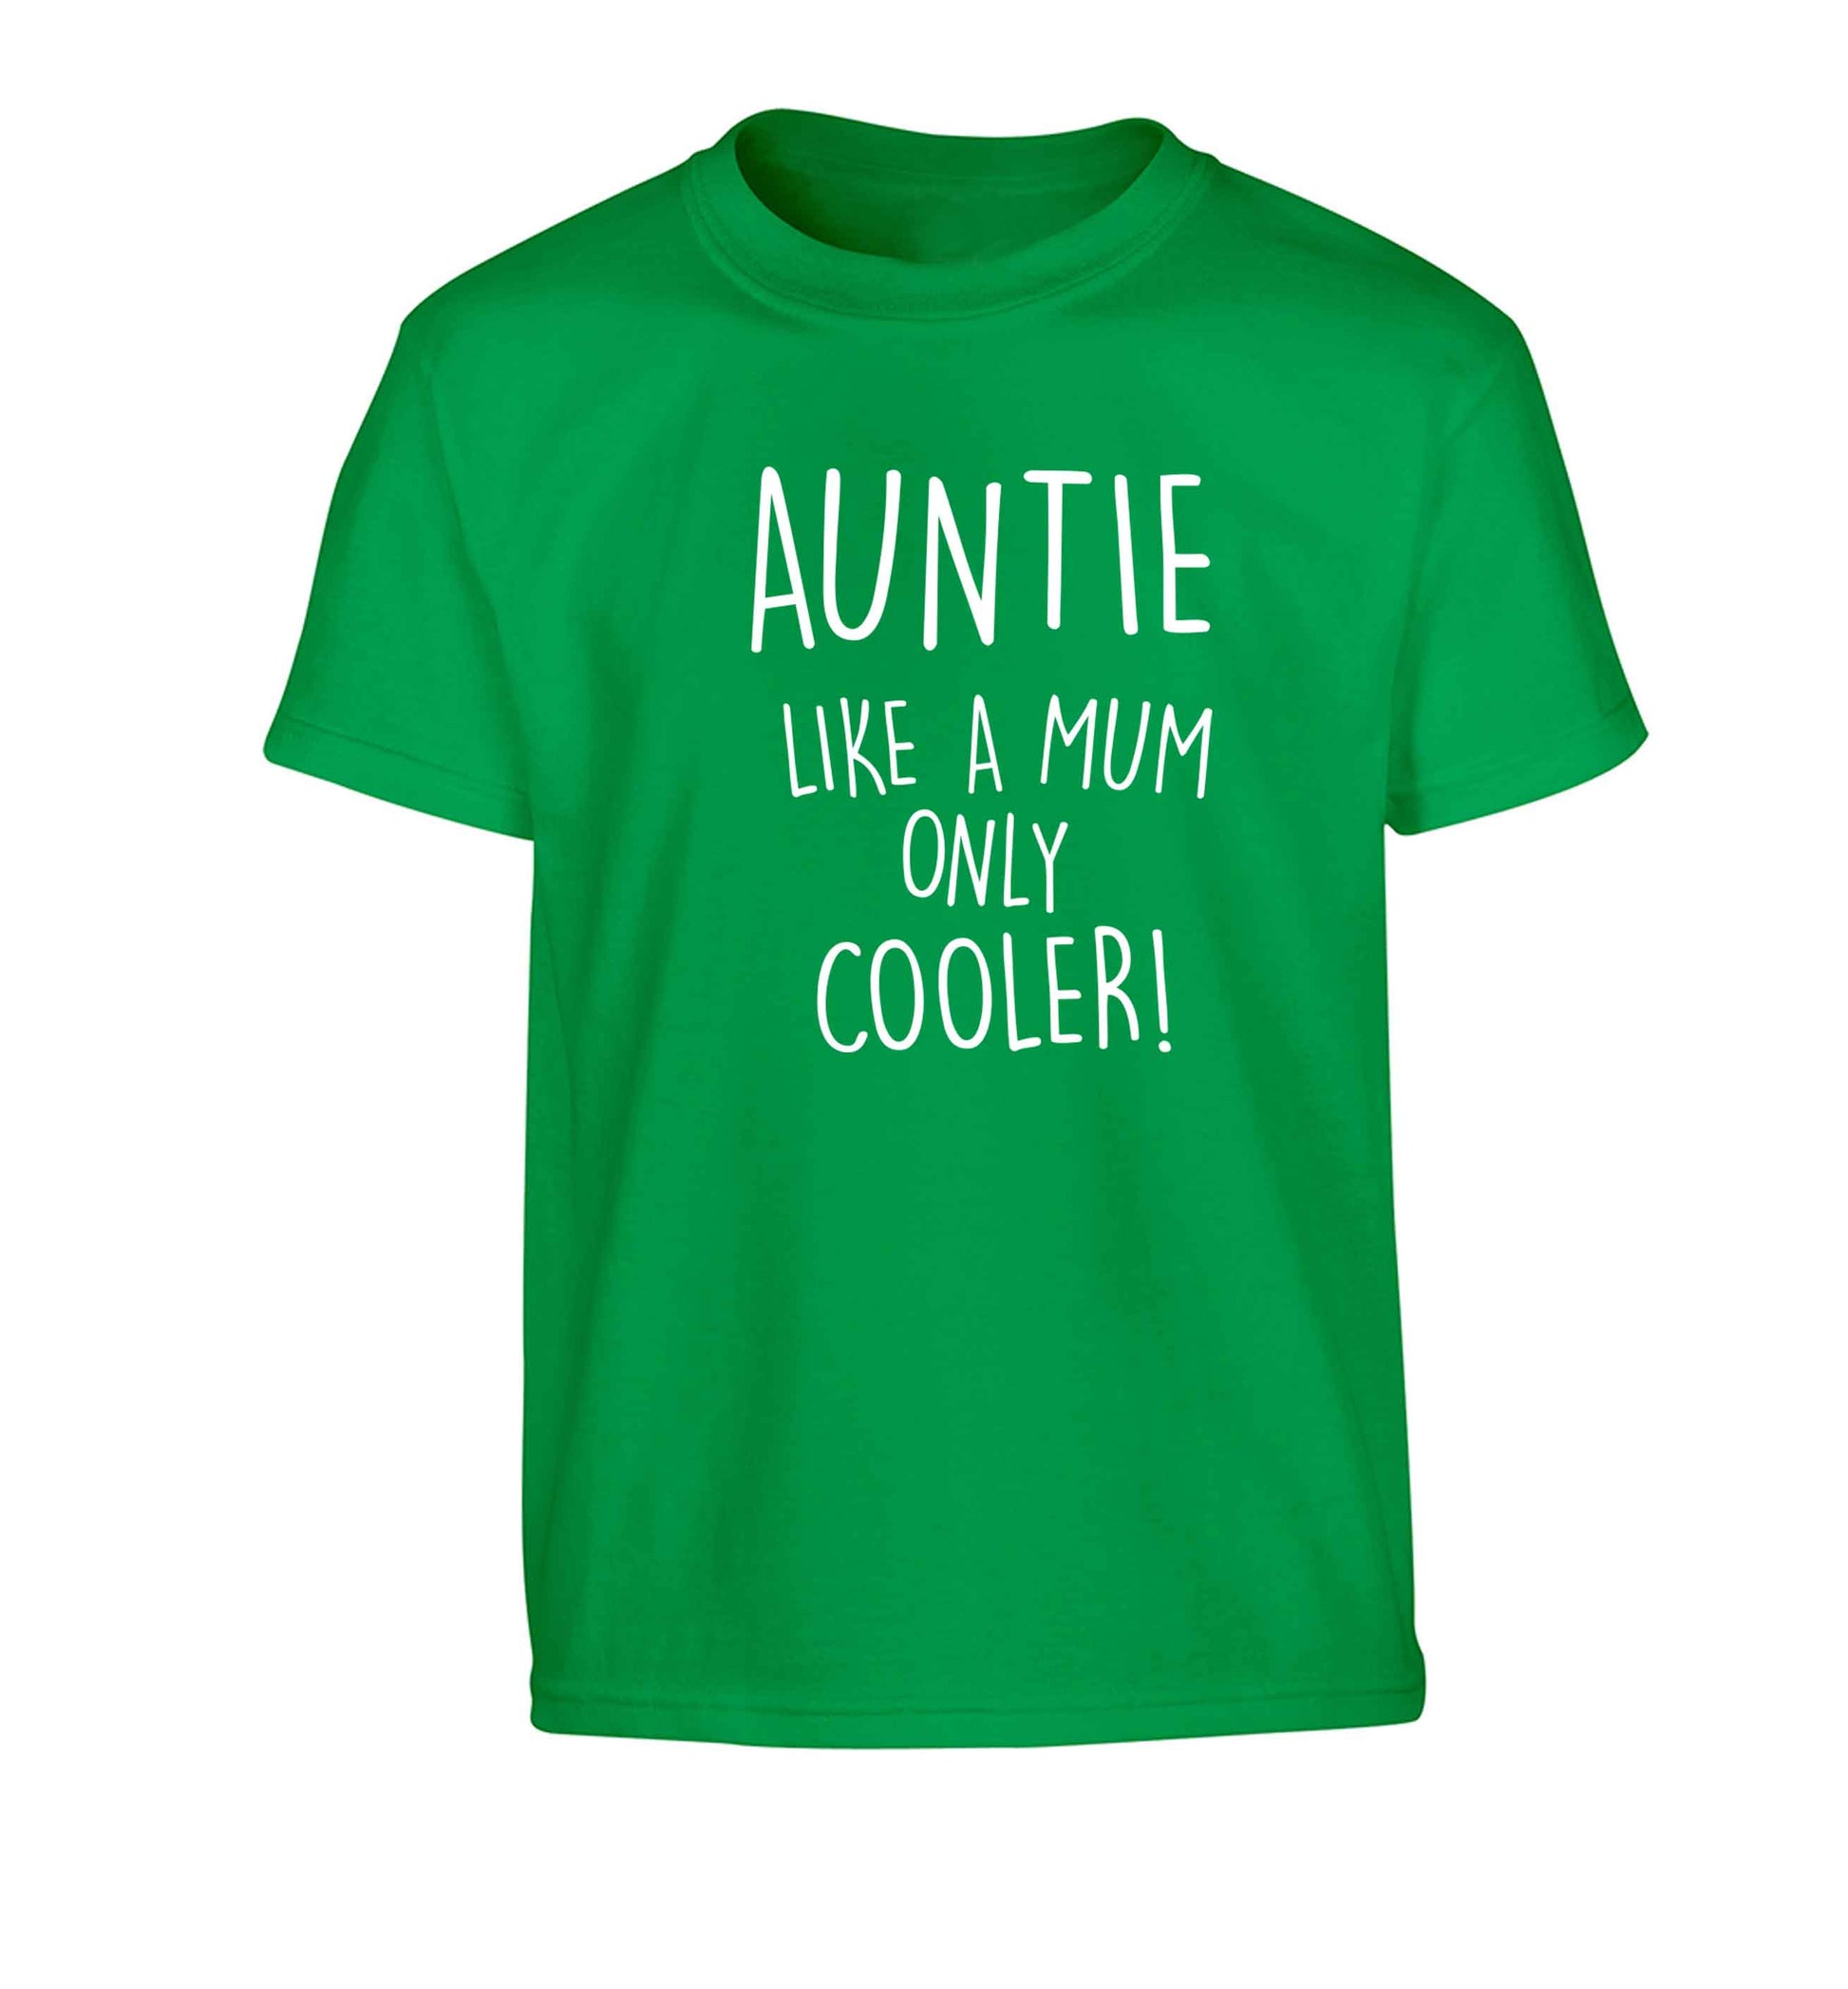 Auntie like a mum only cooler Children's green Tshirt 12-13 Years